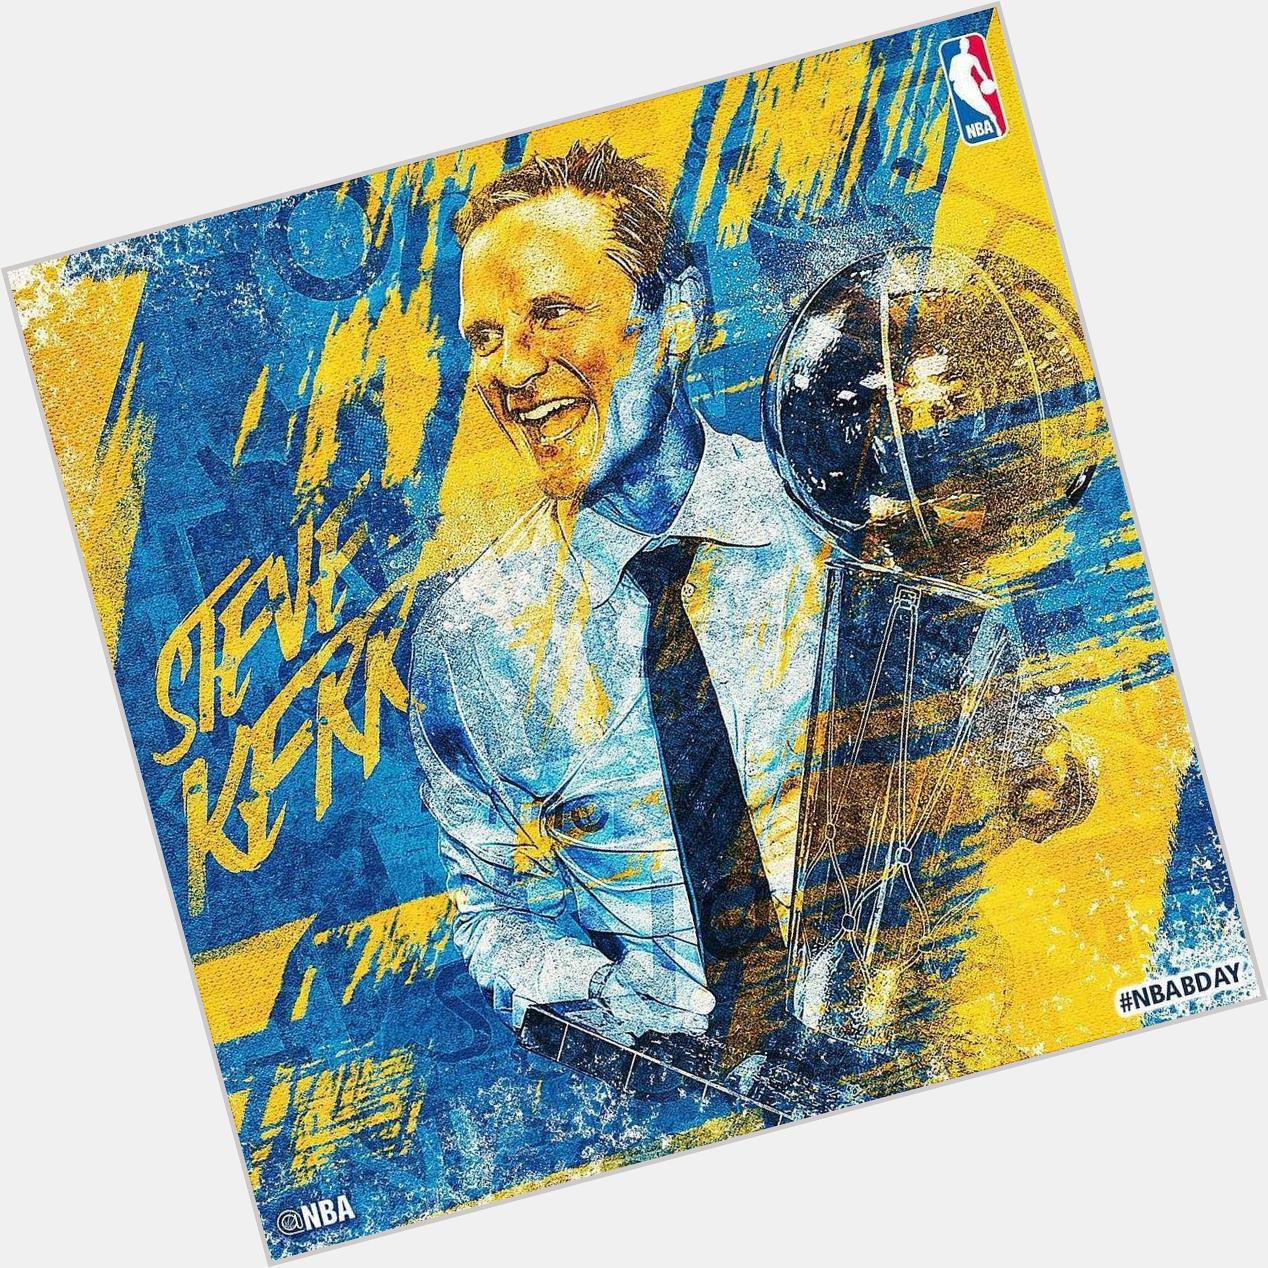 From :
\"Join us in wishing Head Coach & 6x Champ STEVE KERR a HAPPY 50th BIRTHDAY!  